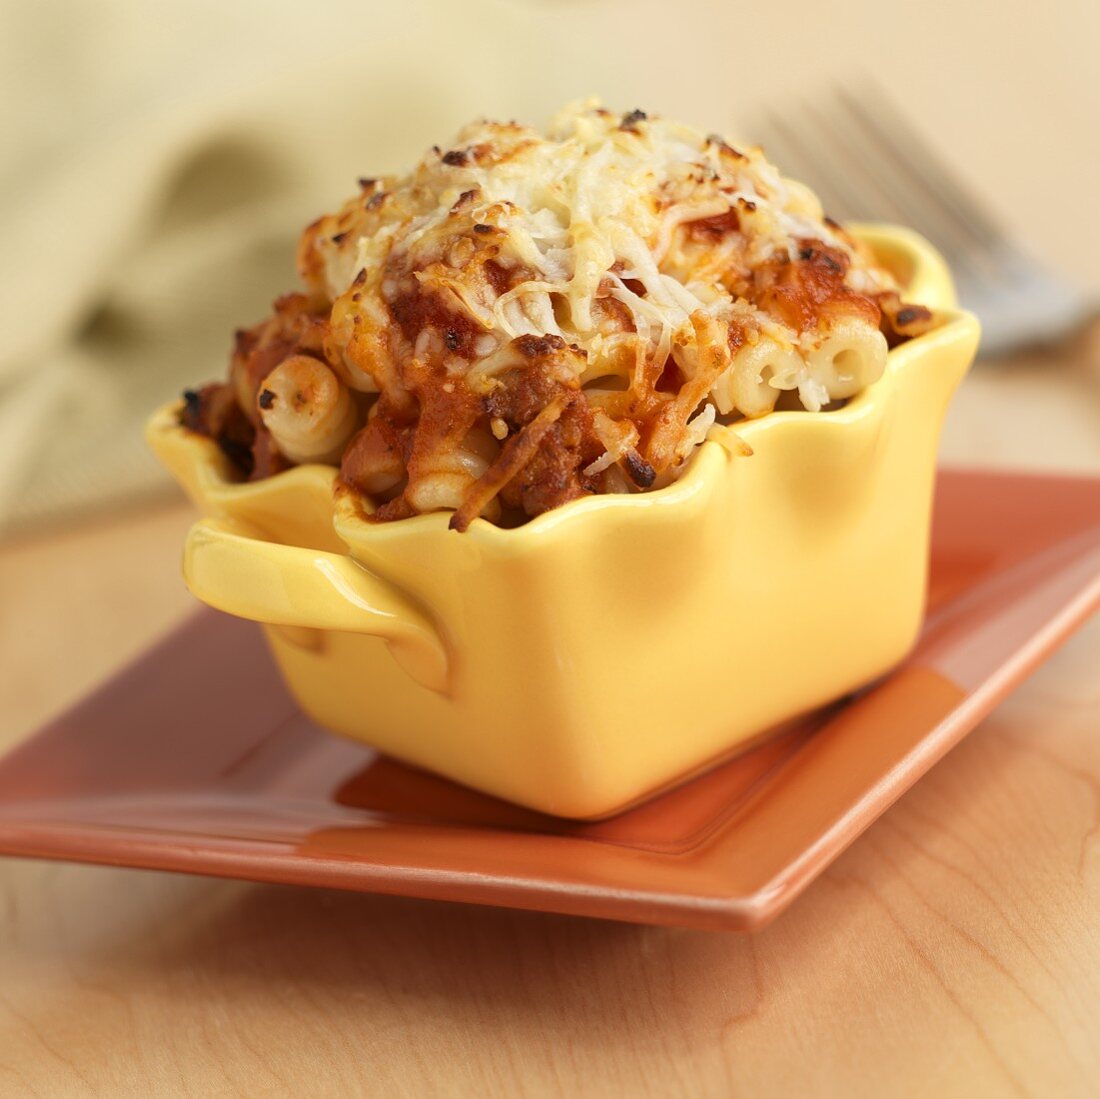 Pasta with Meat Sauce Topped with Cheese Baked in an Individual Dish